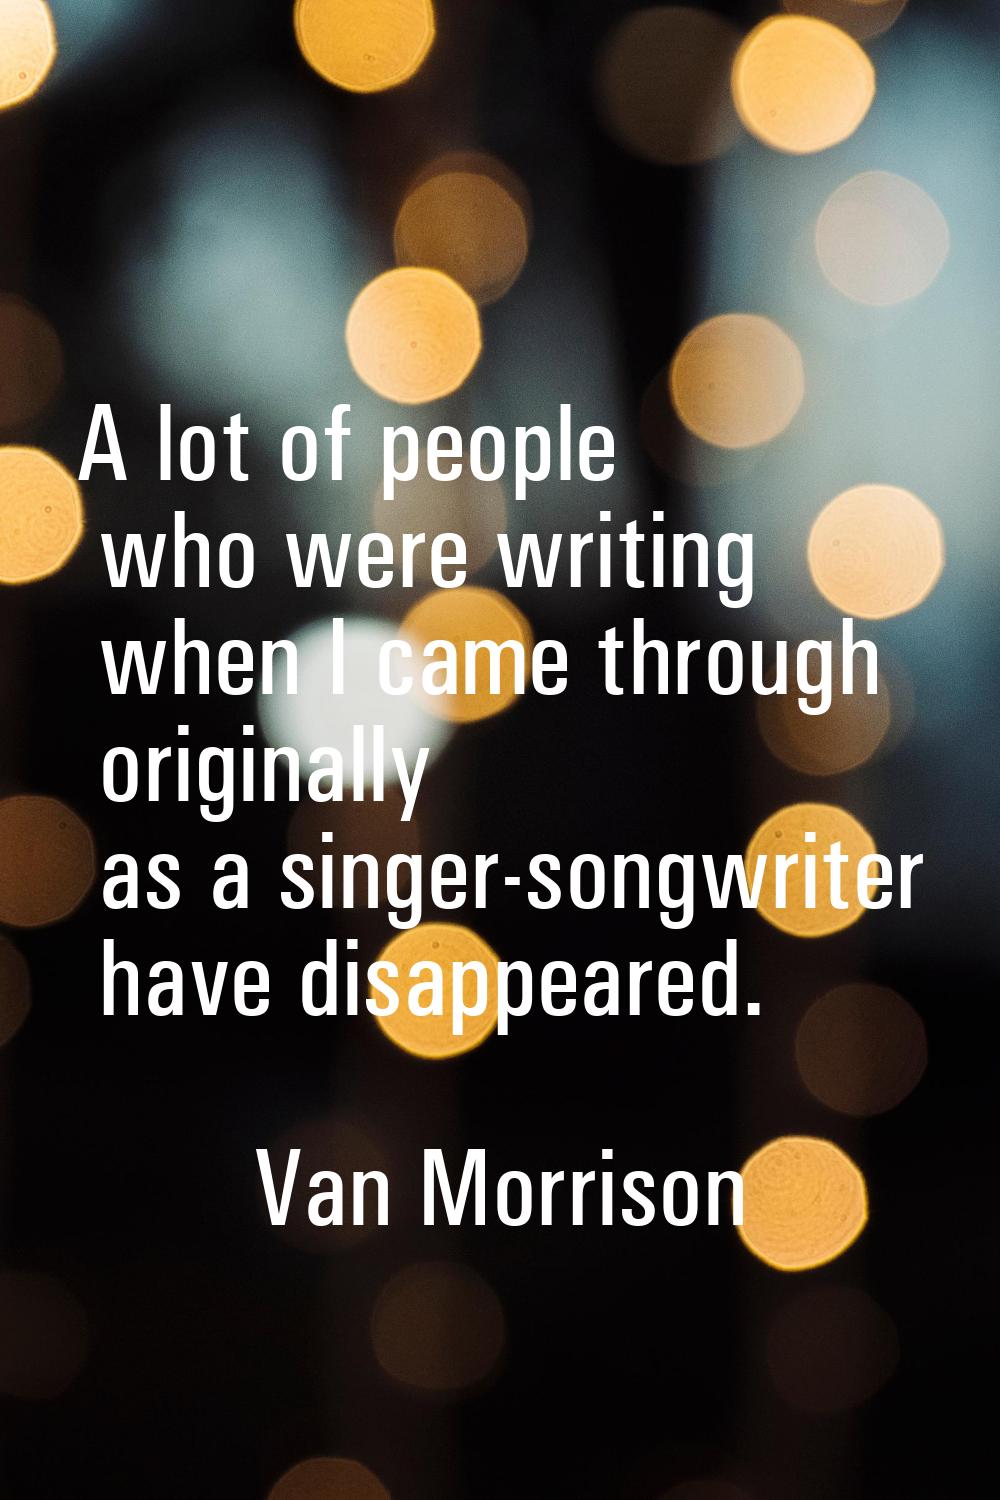 A lot of people who were writing when I came through originally as a singer-songwriter have disappe